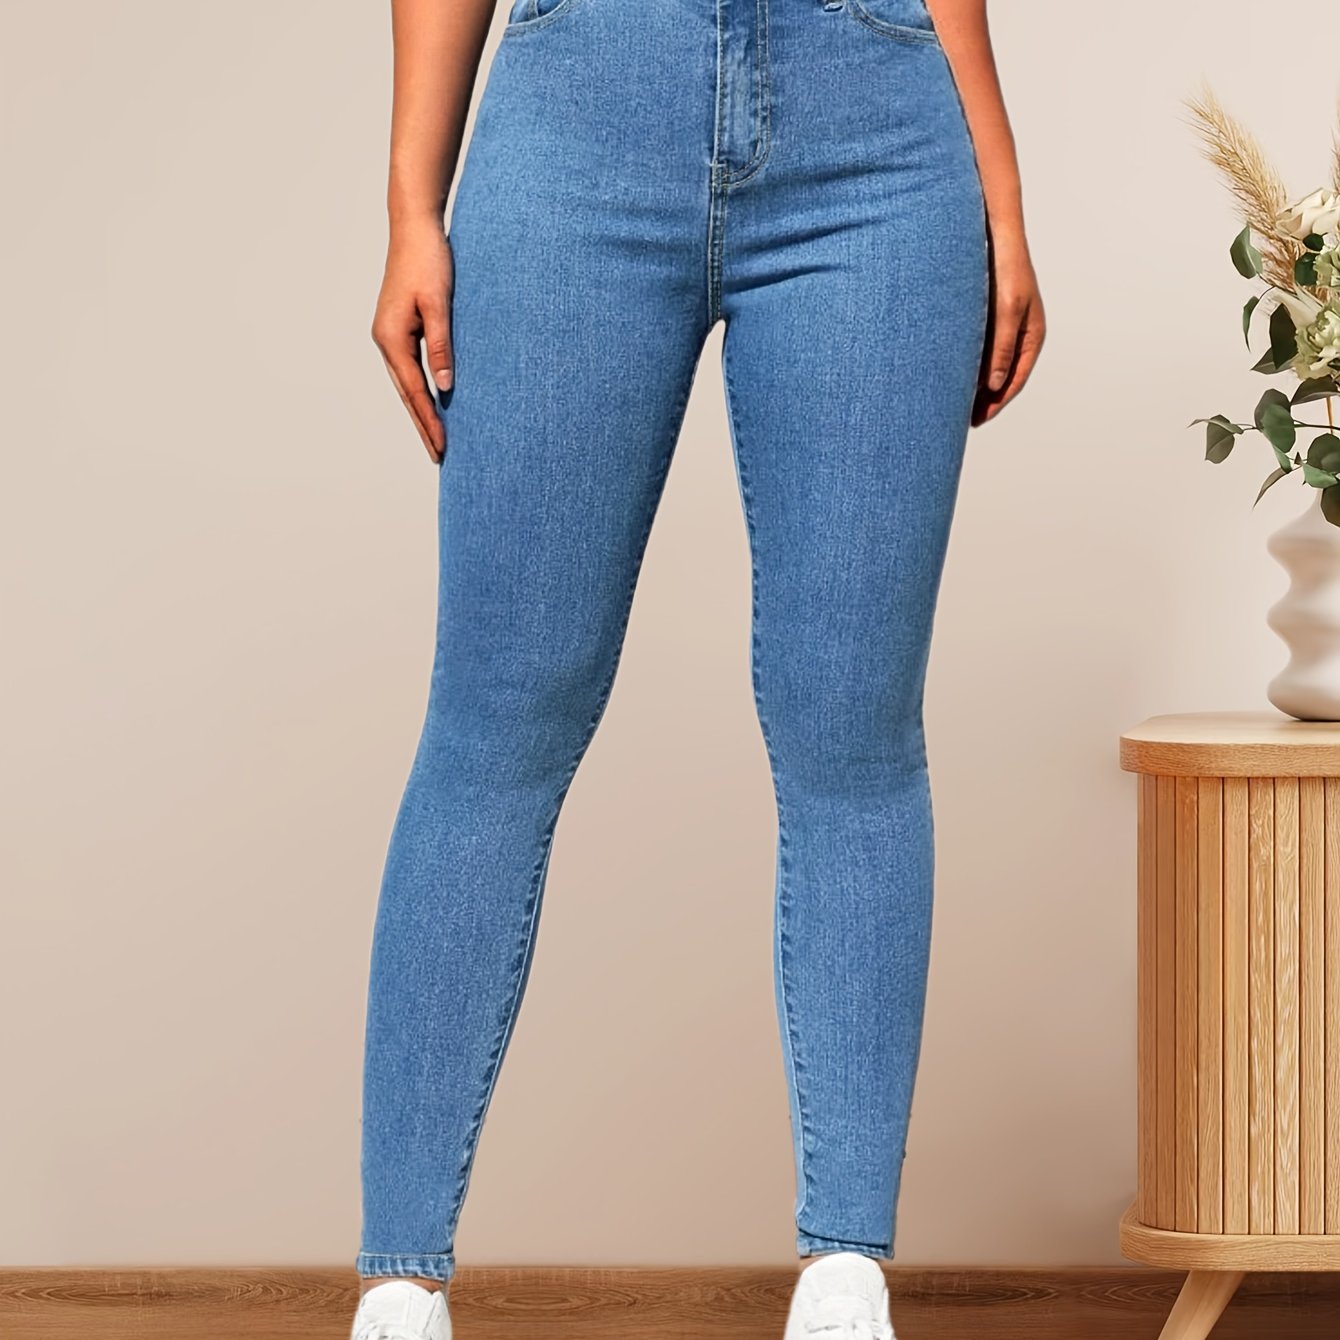 High Rise Light Blue Skinny Jeans, High Waist Tight Fit Pencil Jeans,  Women's Denim & Clothing